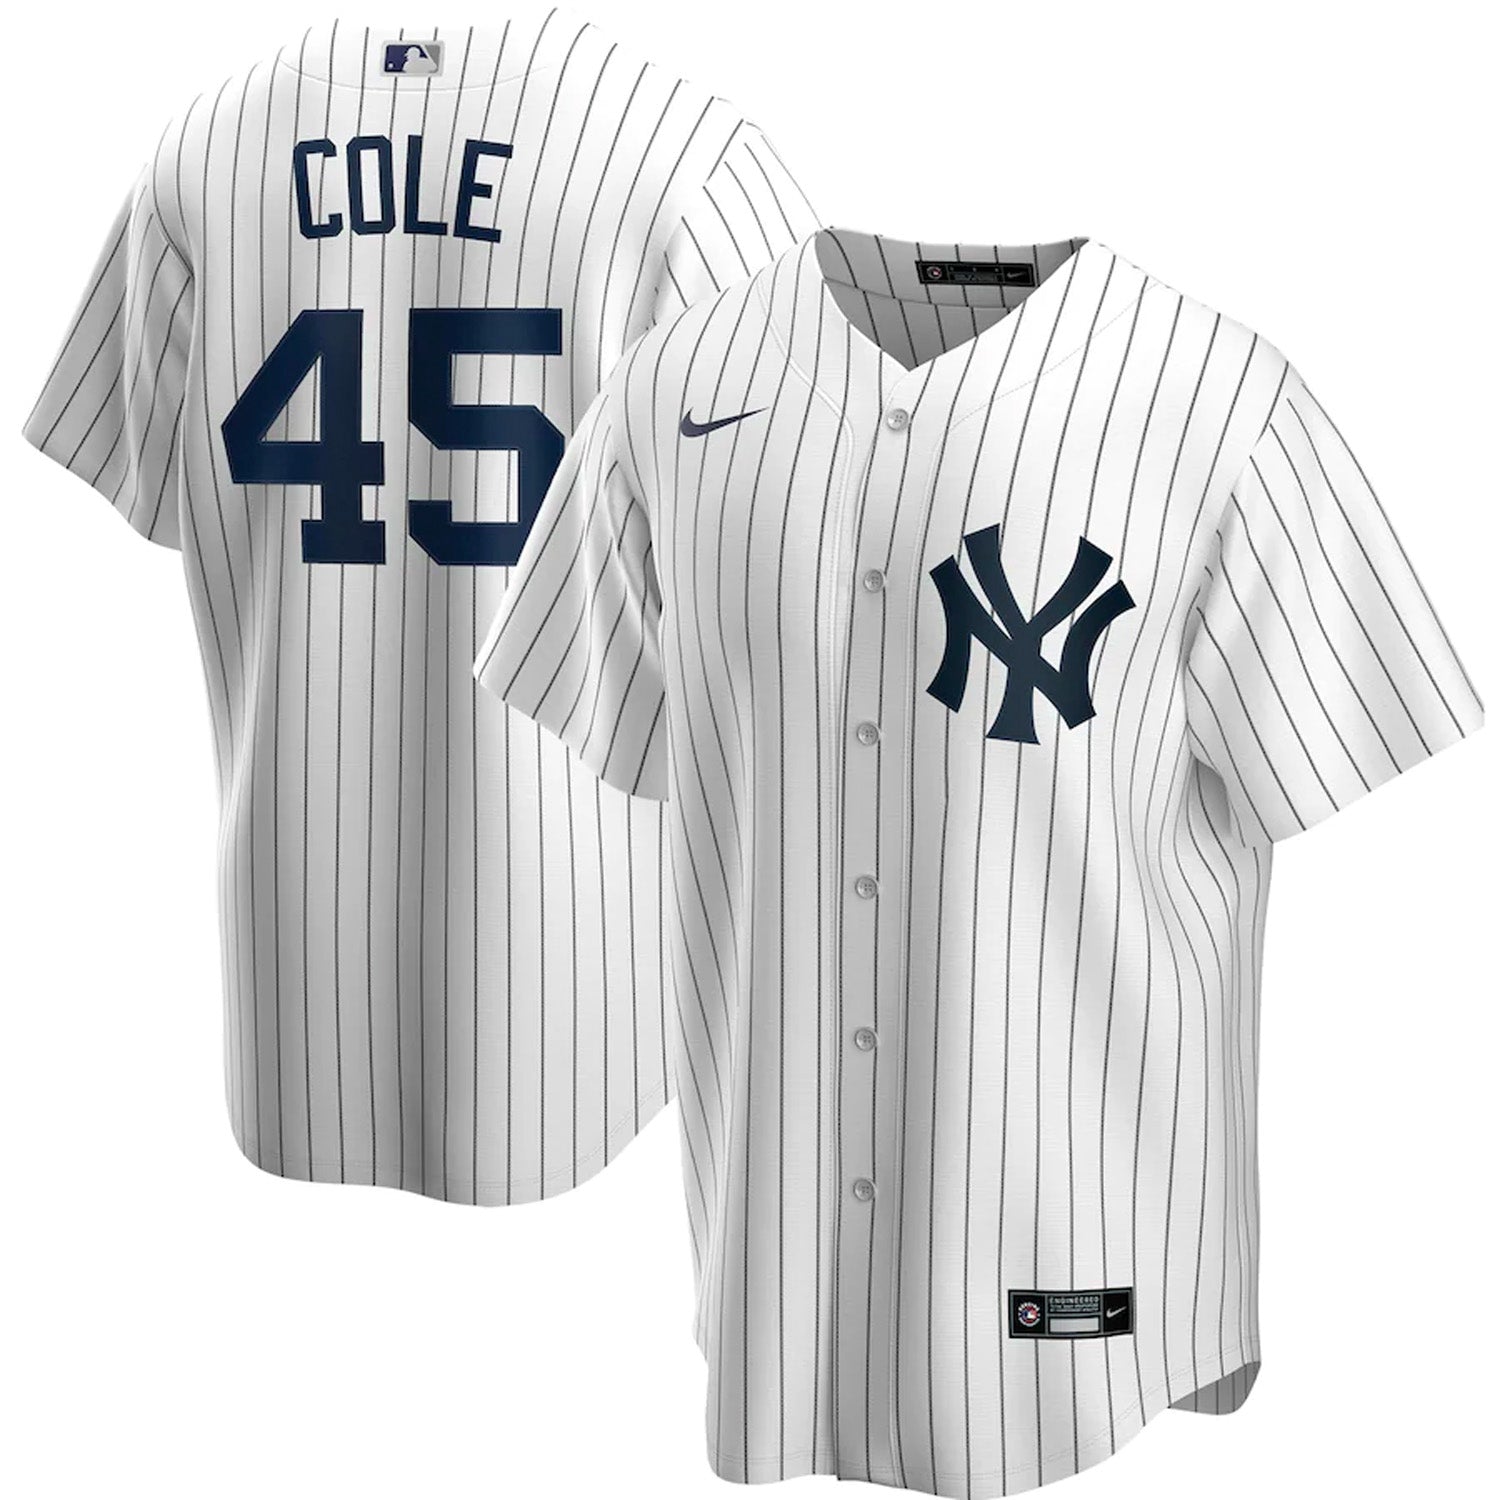 back of yankees jersey